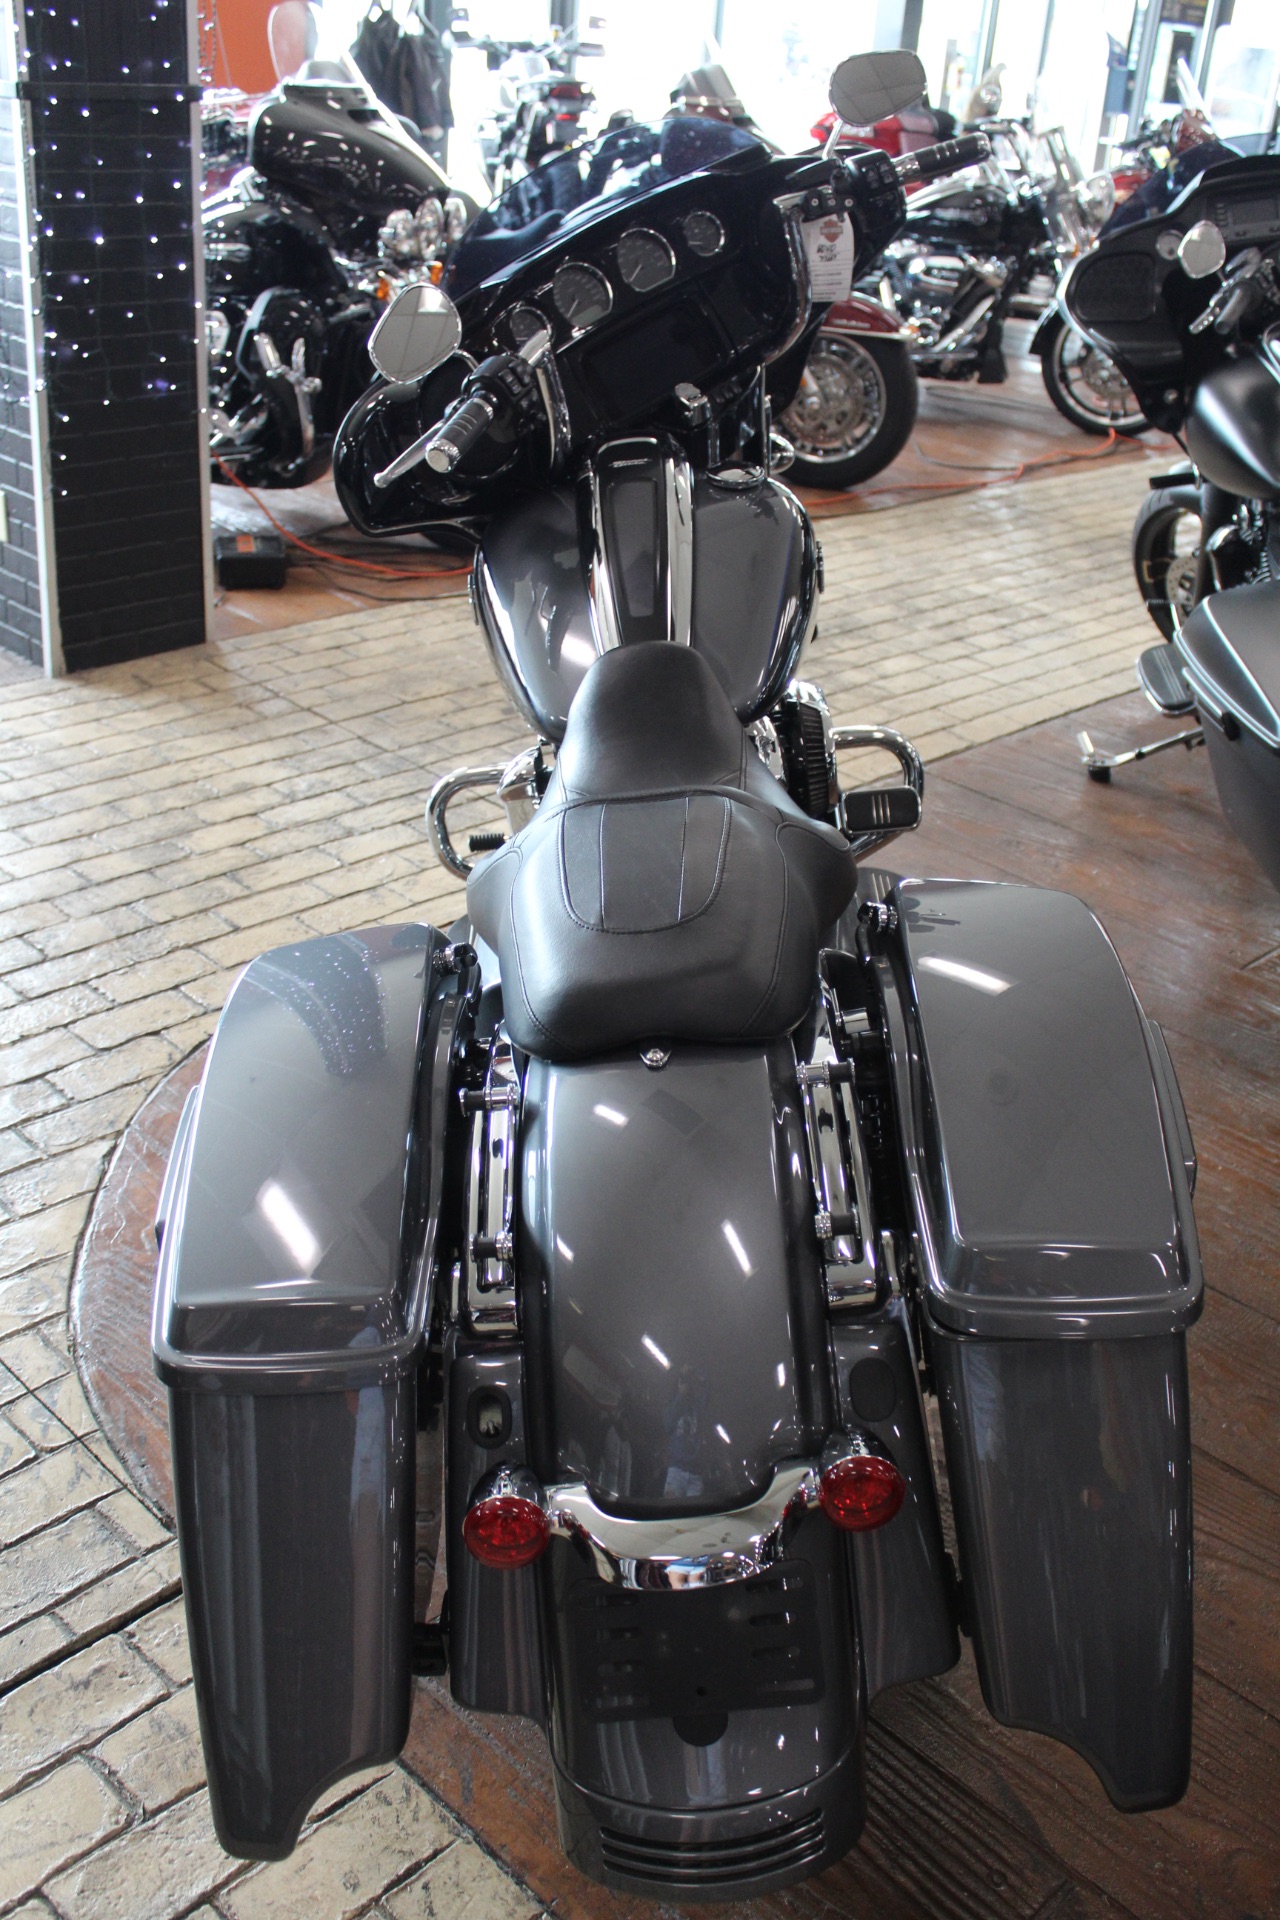 2021 Harley-Davidson Street Glide® Special in Marion, Illinois - Photo 4